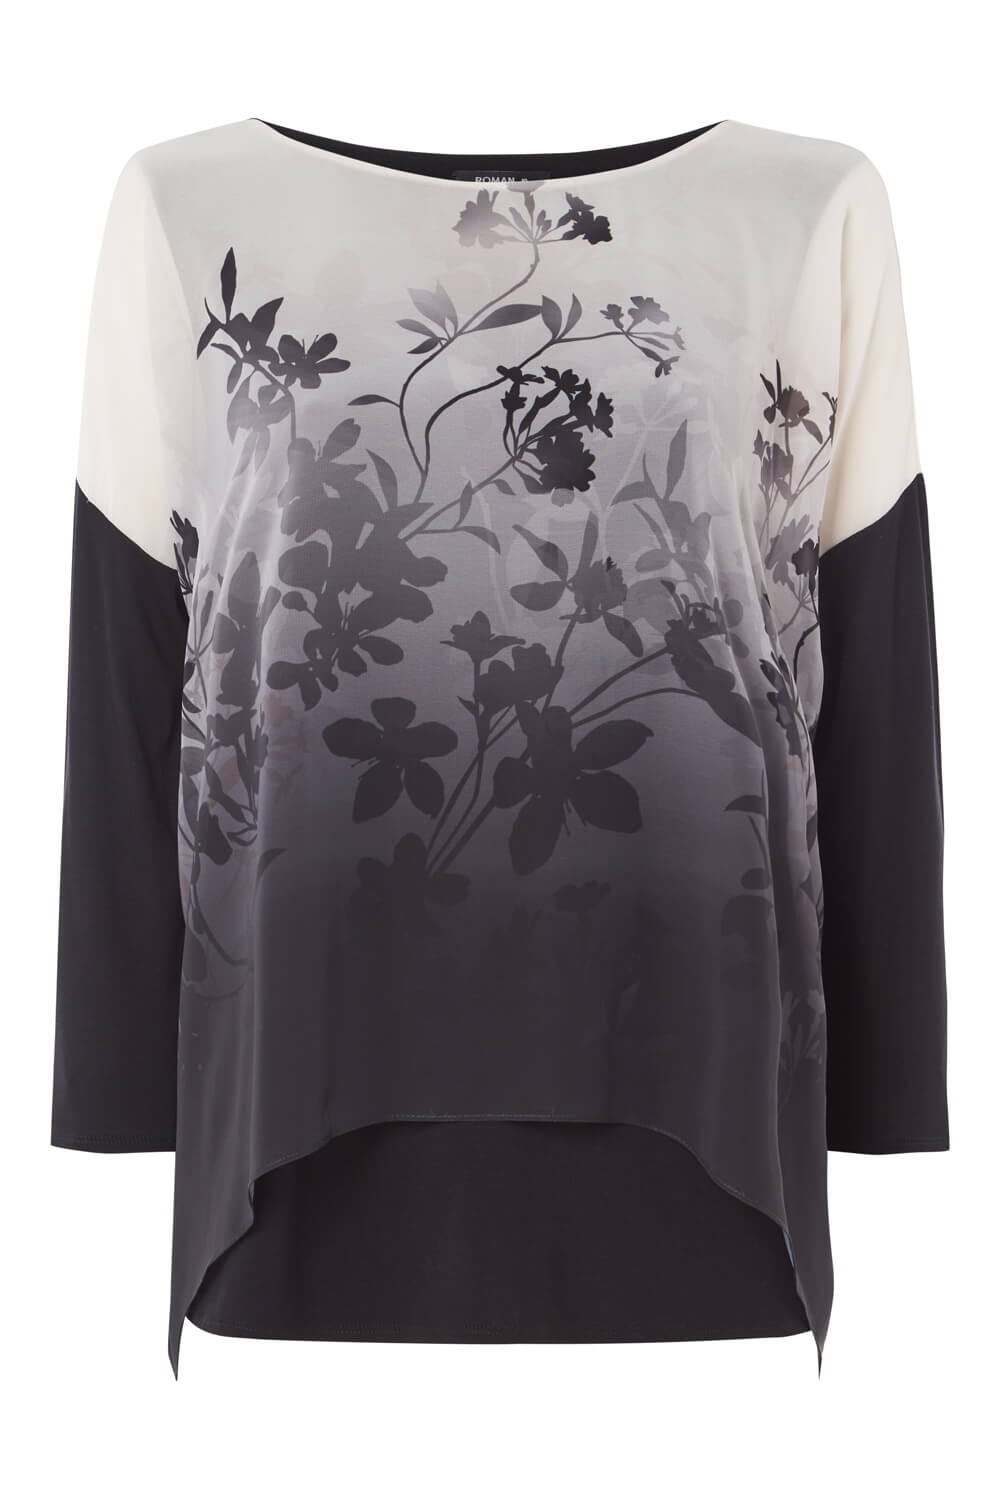 Black Soft Floral Overlay Chiffon Top, Image 5 of 5